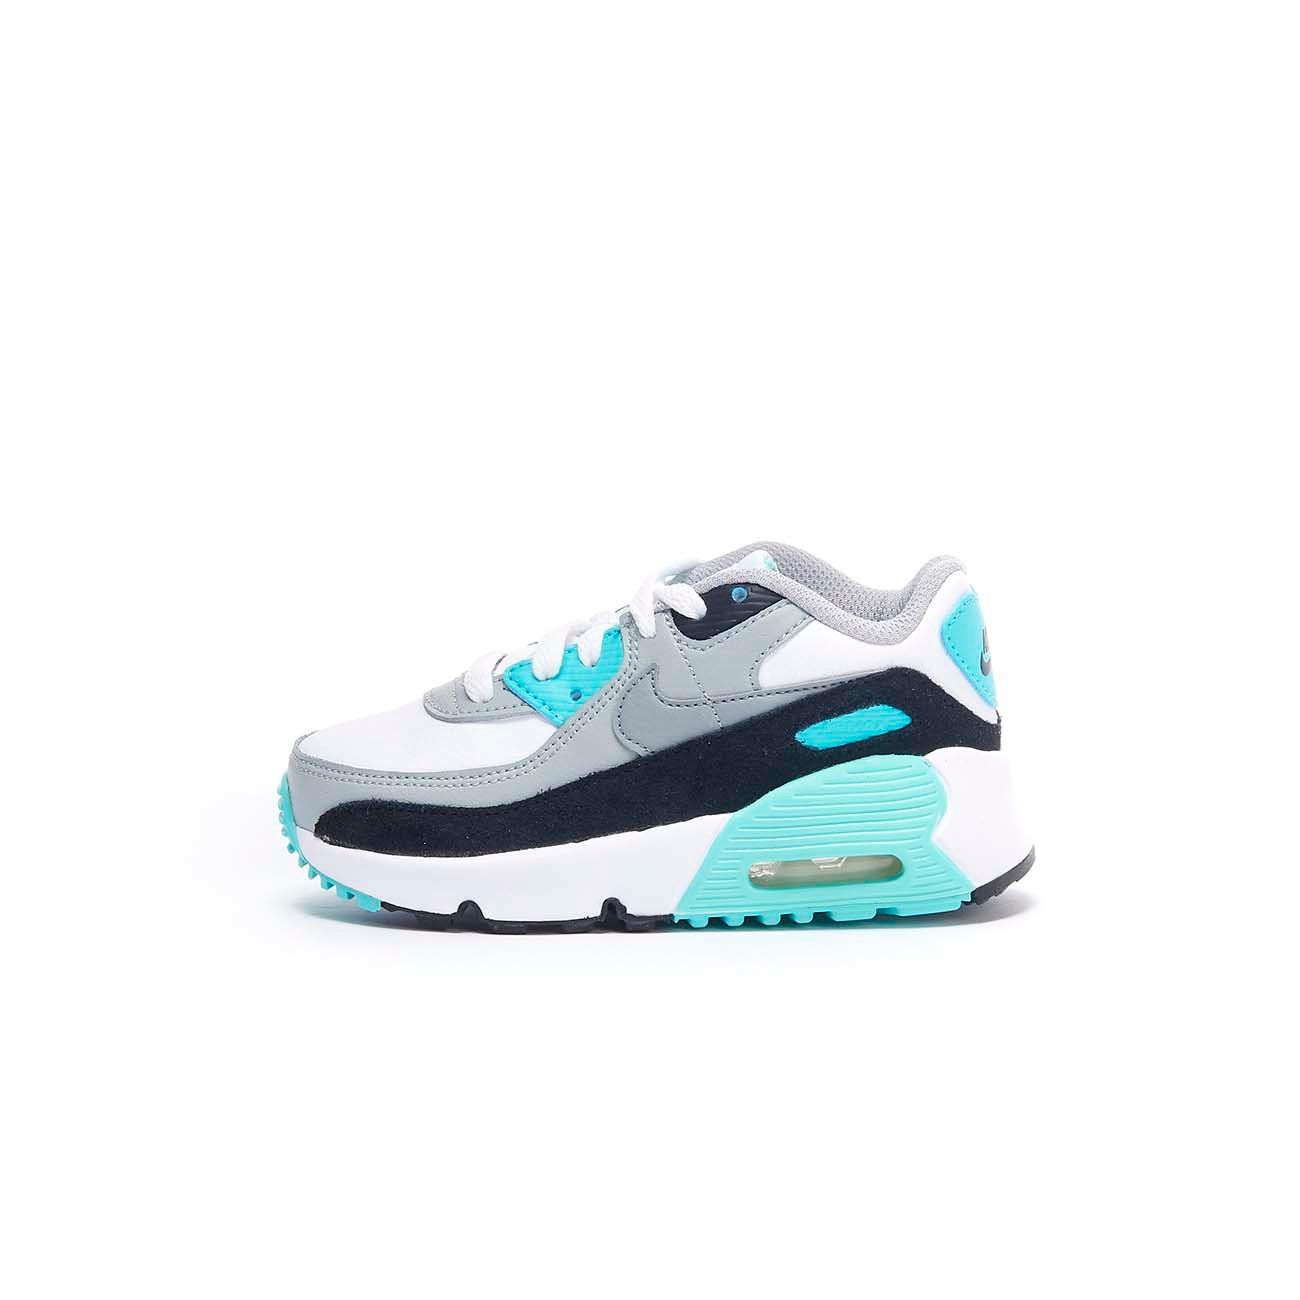 NIKE SNEAKERS AIR MAX 90 LTR Baby White Hyper Turquoise Particle ... منتجات قوي